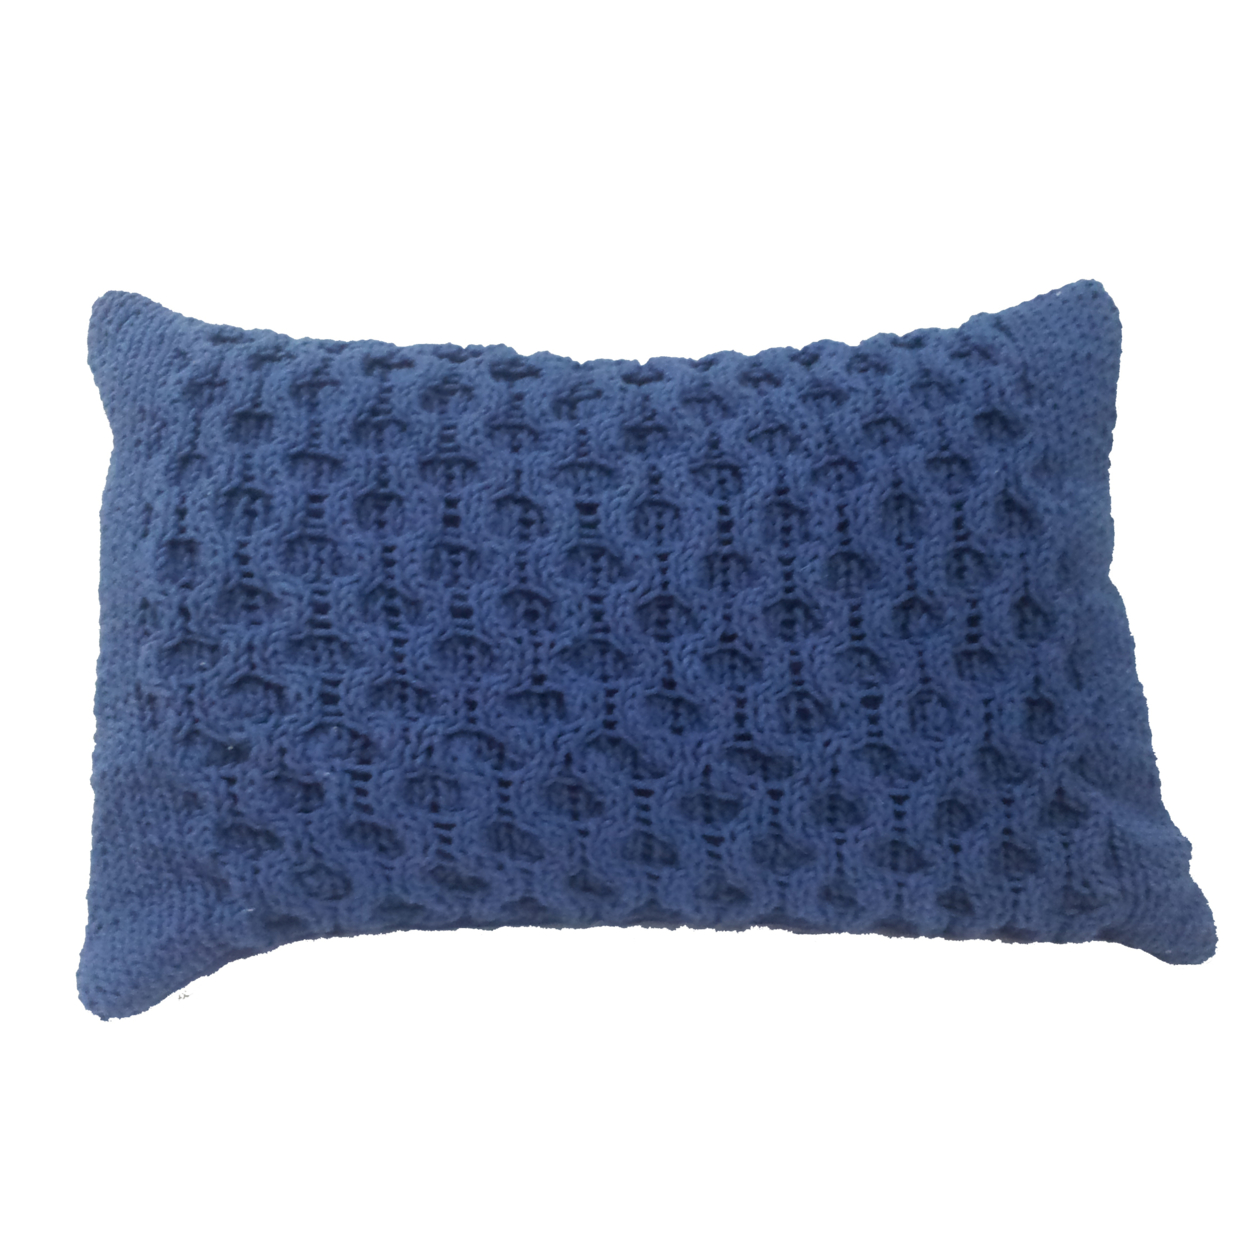 20 X 14 Inch Knitted Pillow With Polyester Fiber Fill, Navy Blue- Saltoro Sherpi